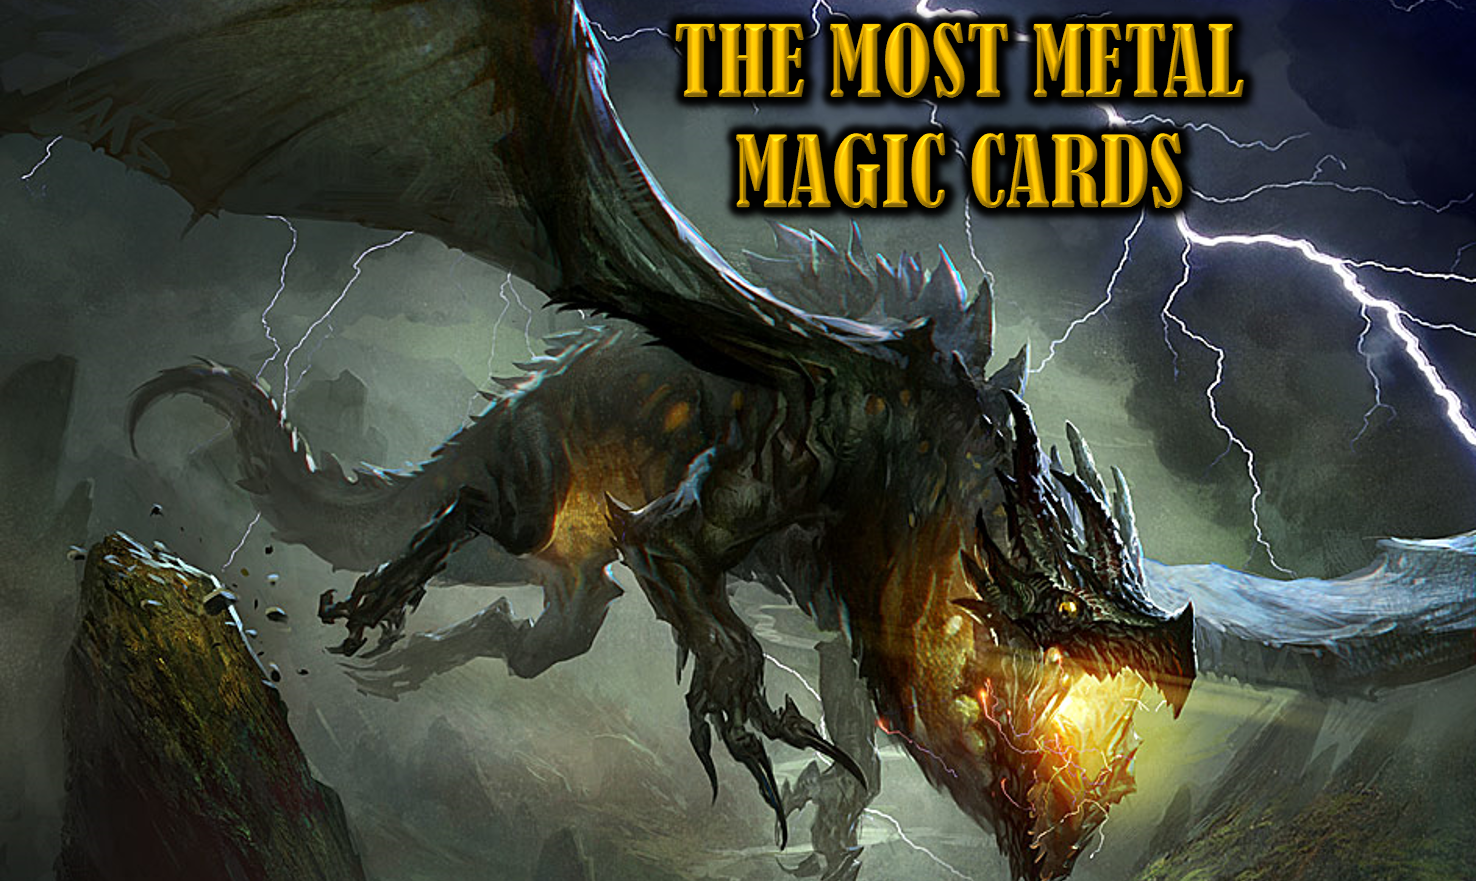 The Most Metal Magic Cards